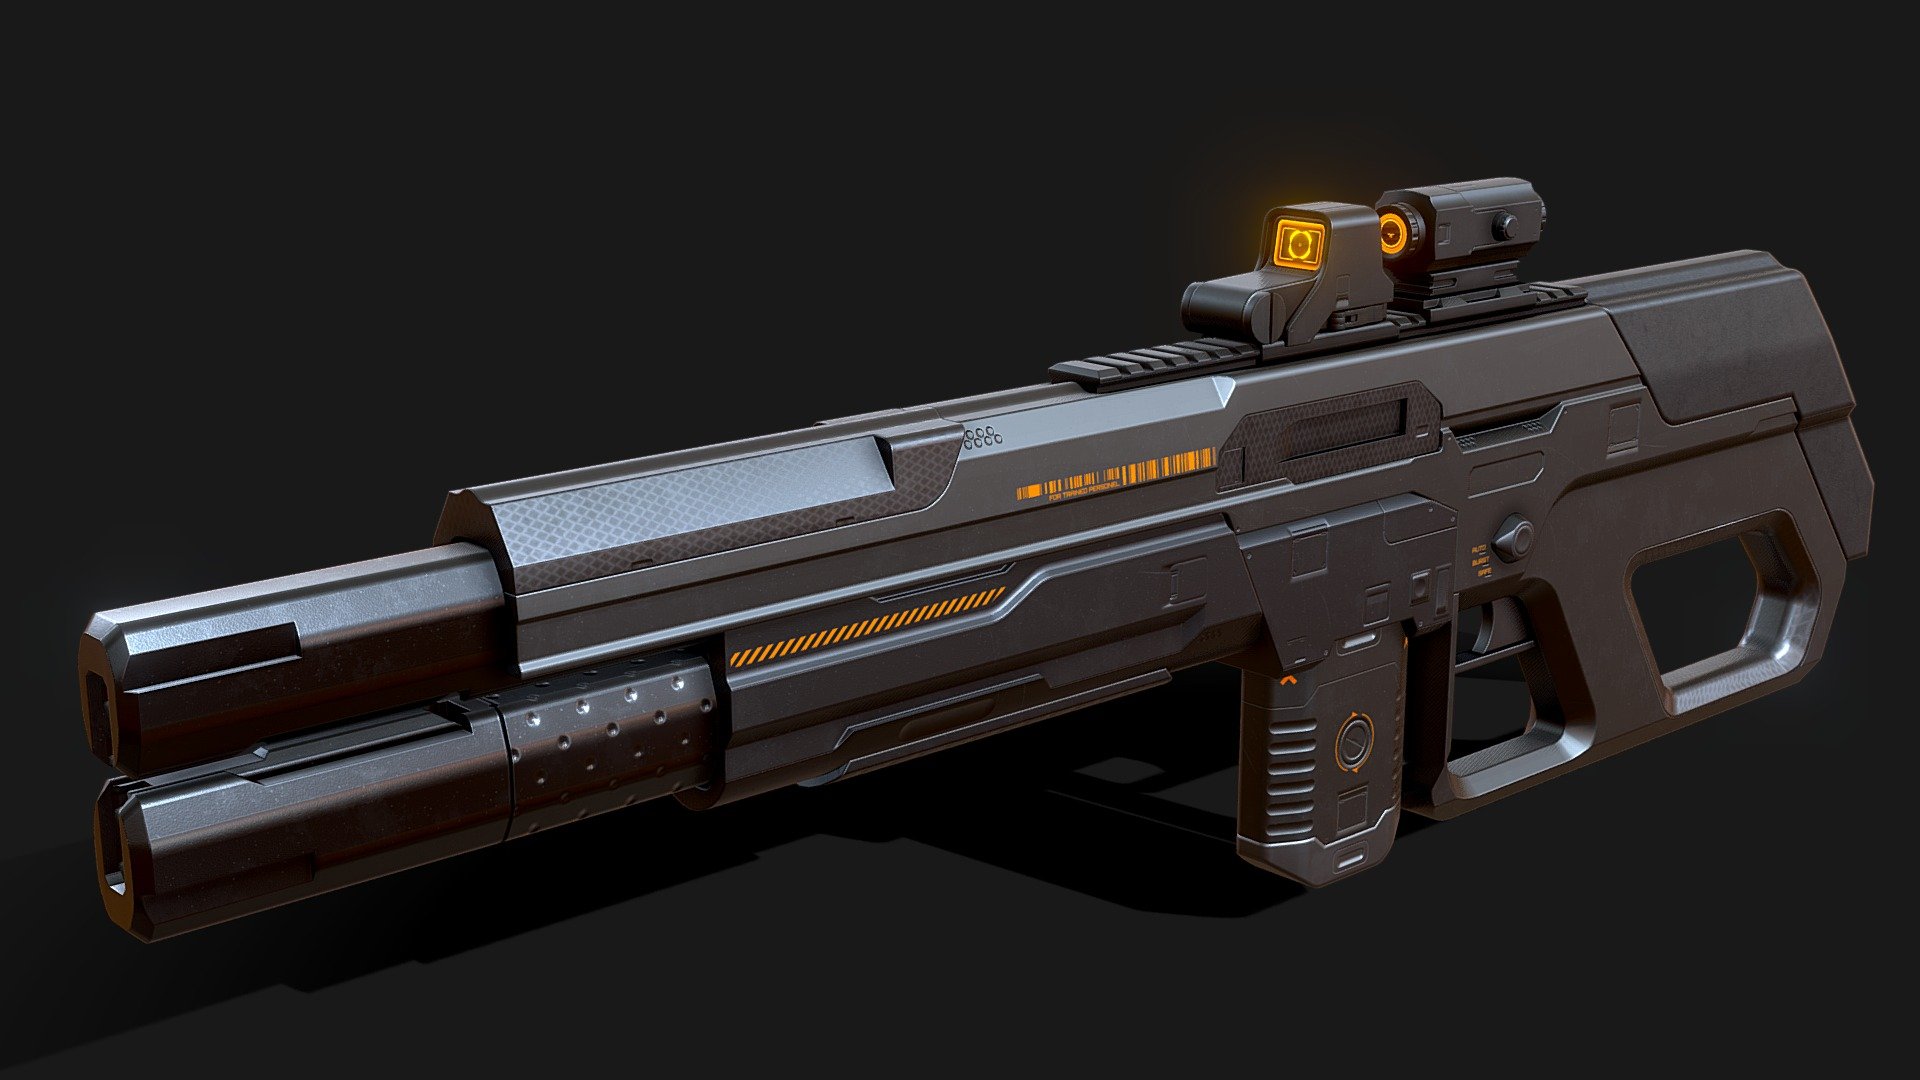 A sci fi shotgun model i made during my free time.

Blender + Substance Painter. 2k textures, 6 texture sets with baked normals 3d model